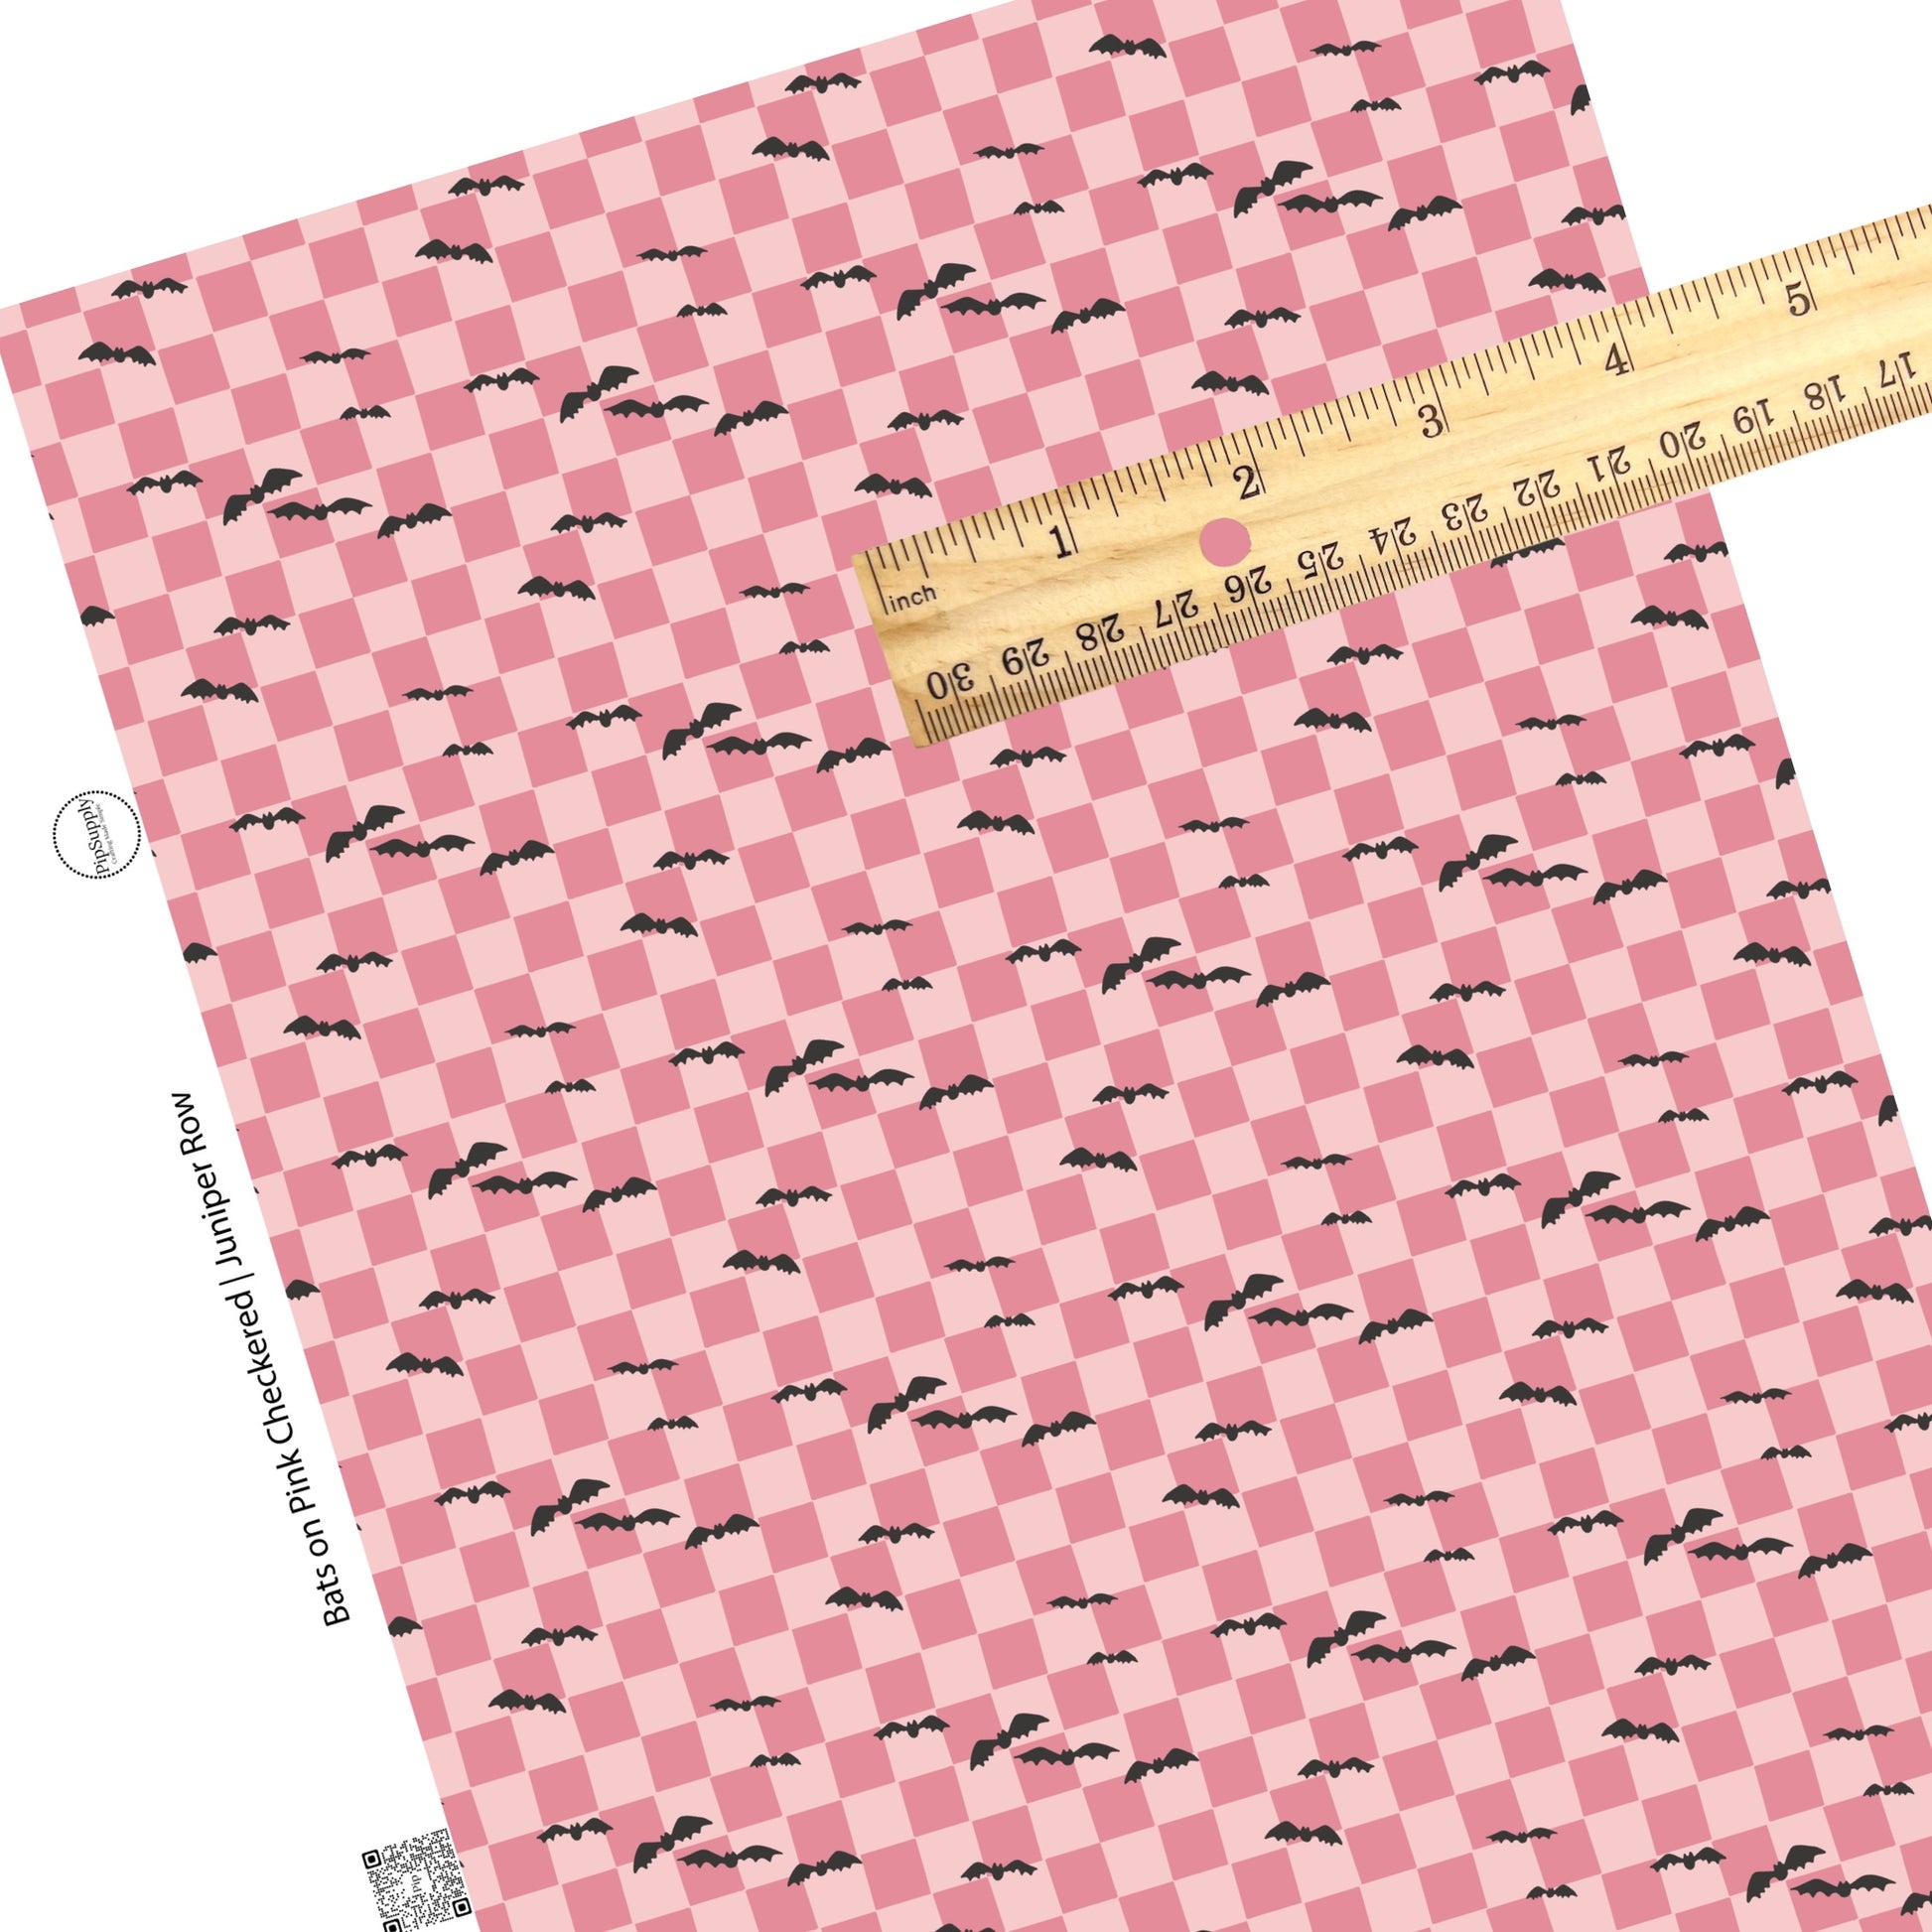 Multi pink checkered with black bats faux leather sheets